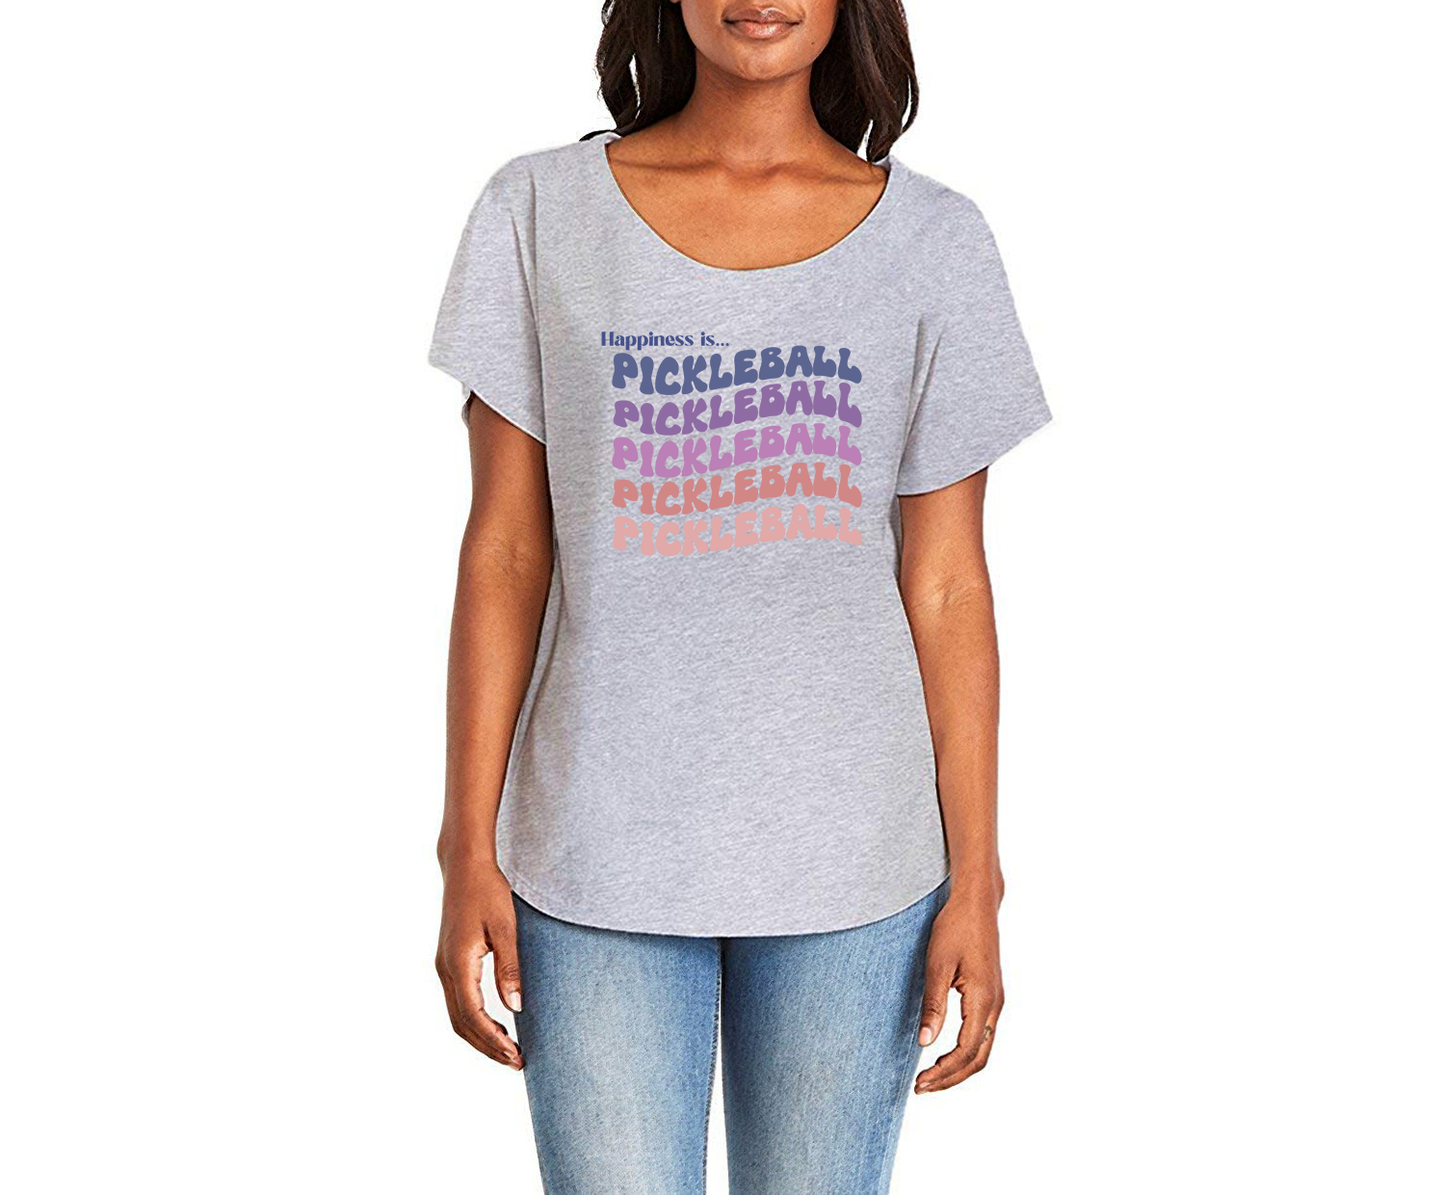 Happiness is Pickleball Ladies Tee Shirt - In White & Grey